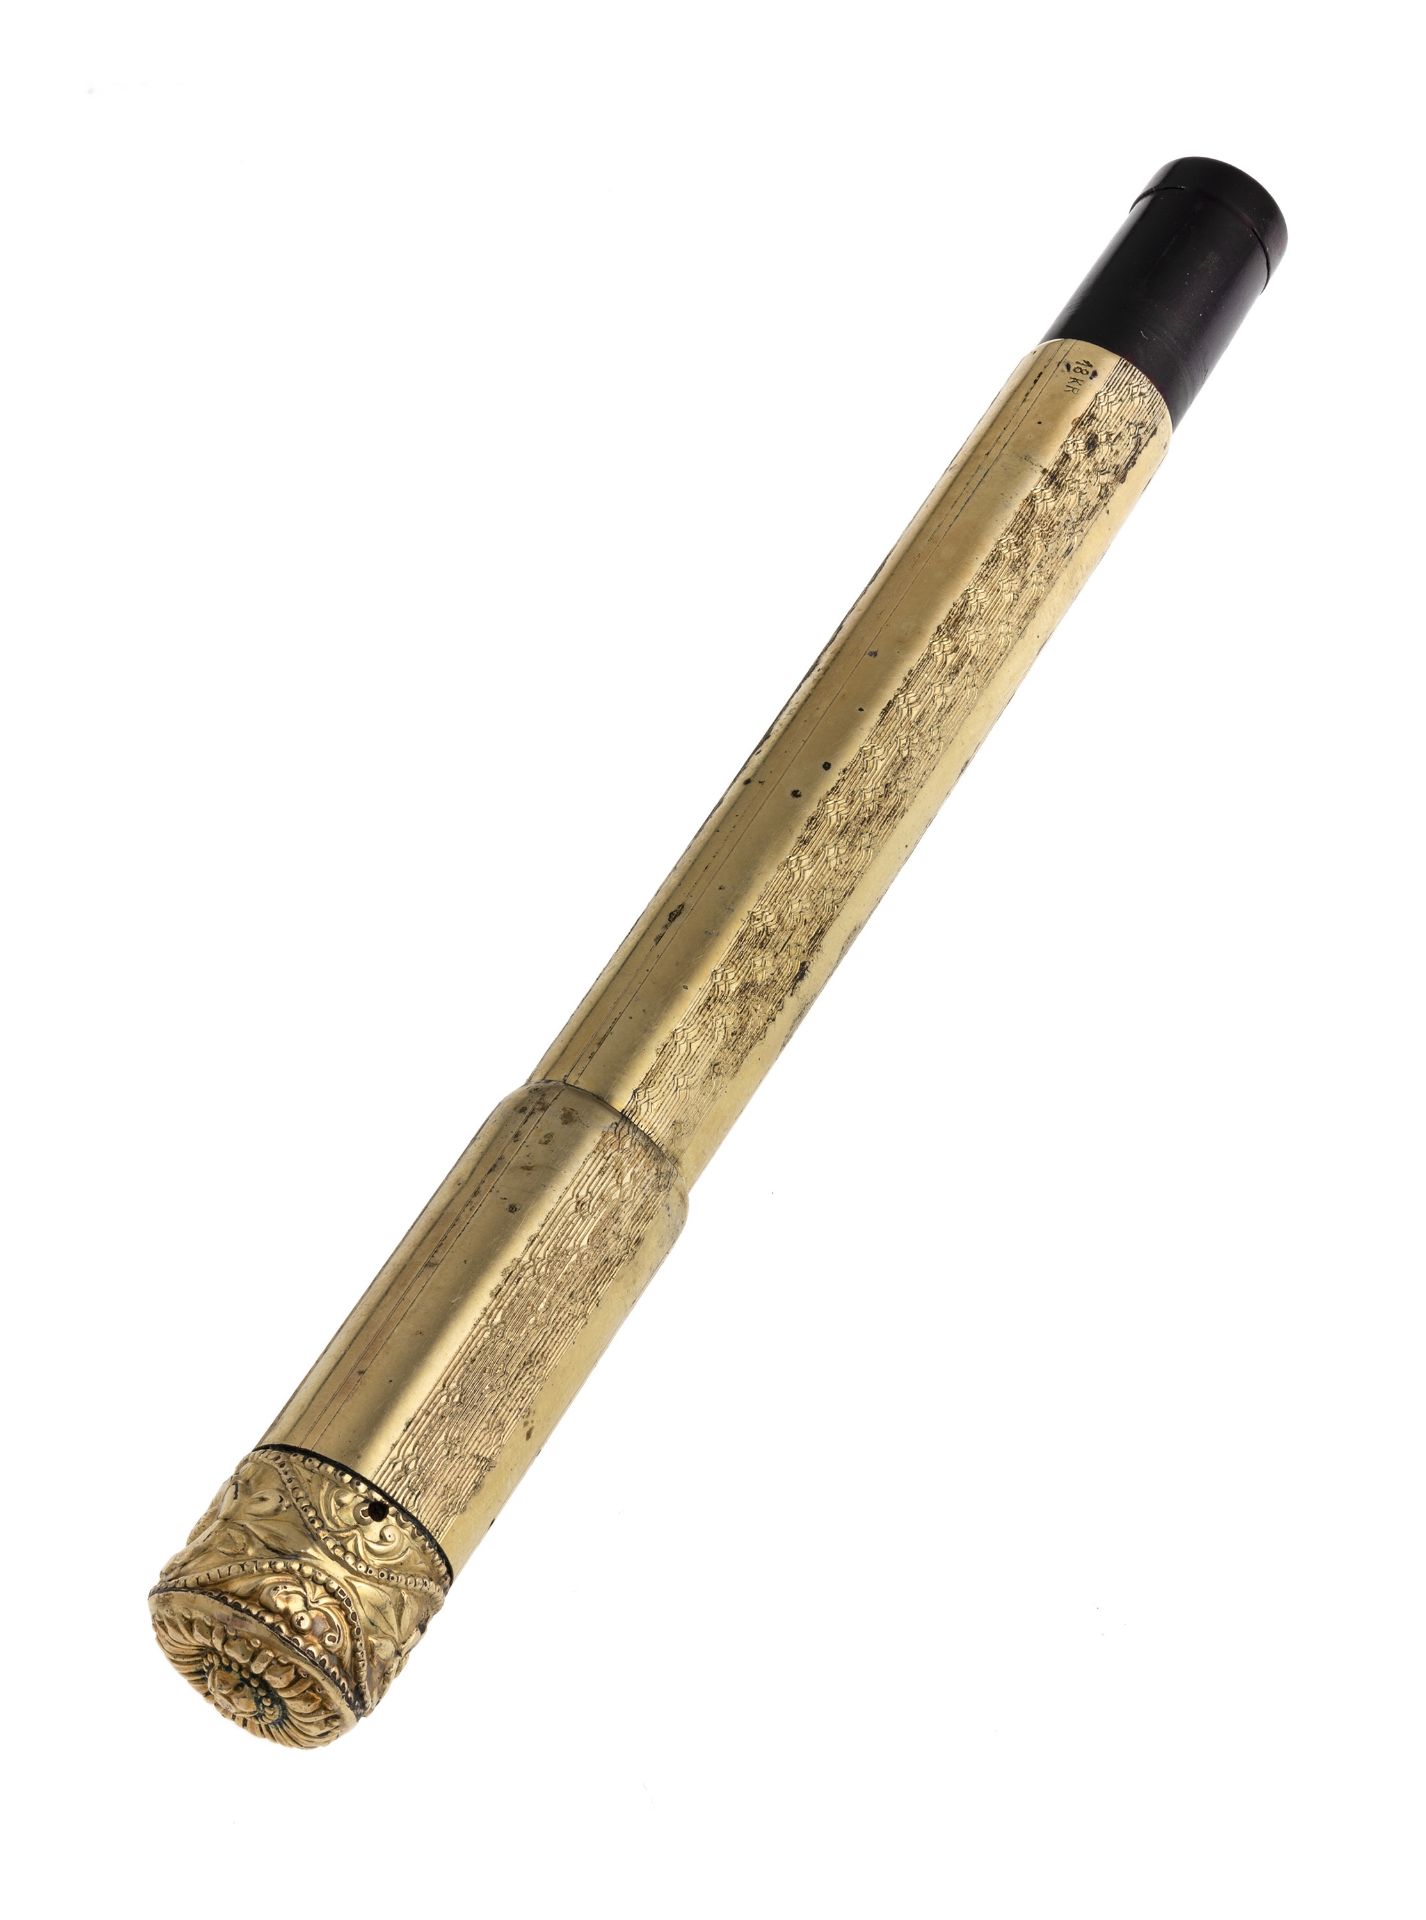 GOLD FOUNTAIN PEN EARLY 20TH CENTURY